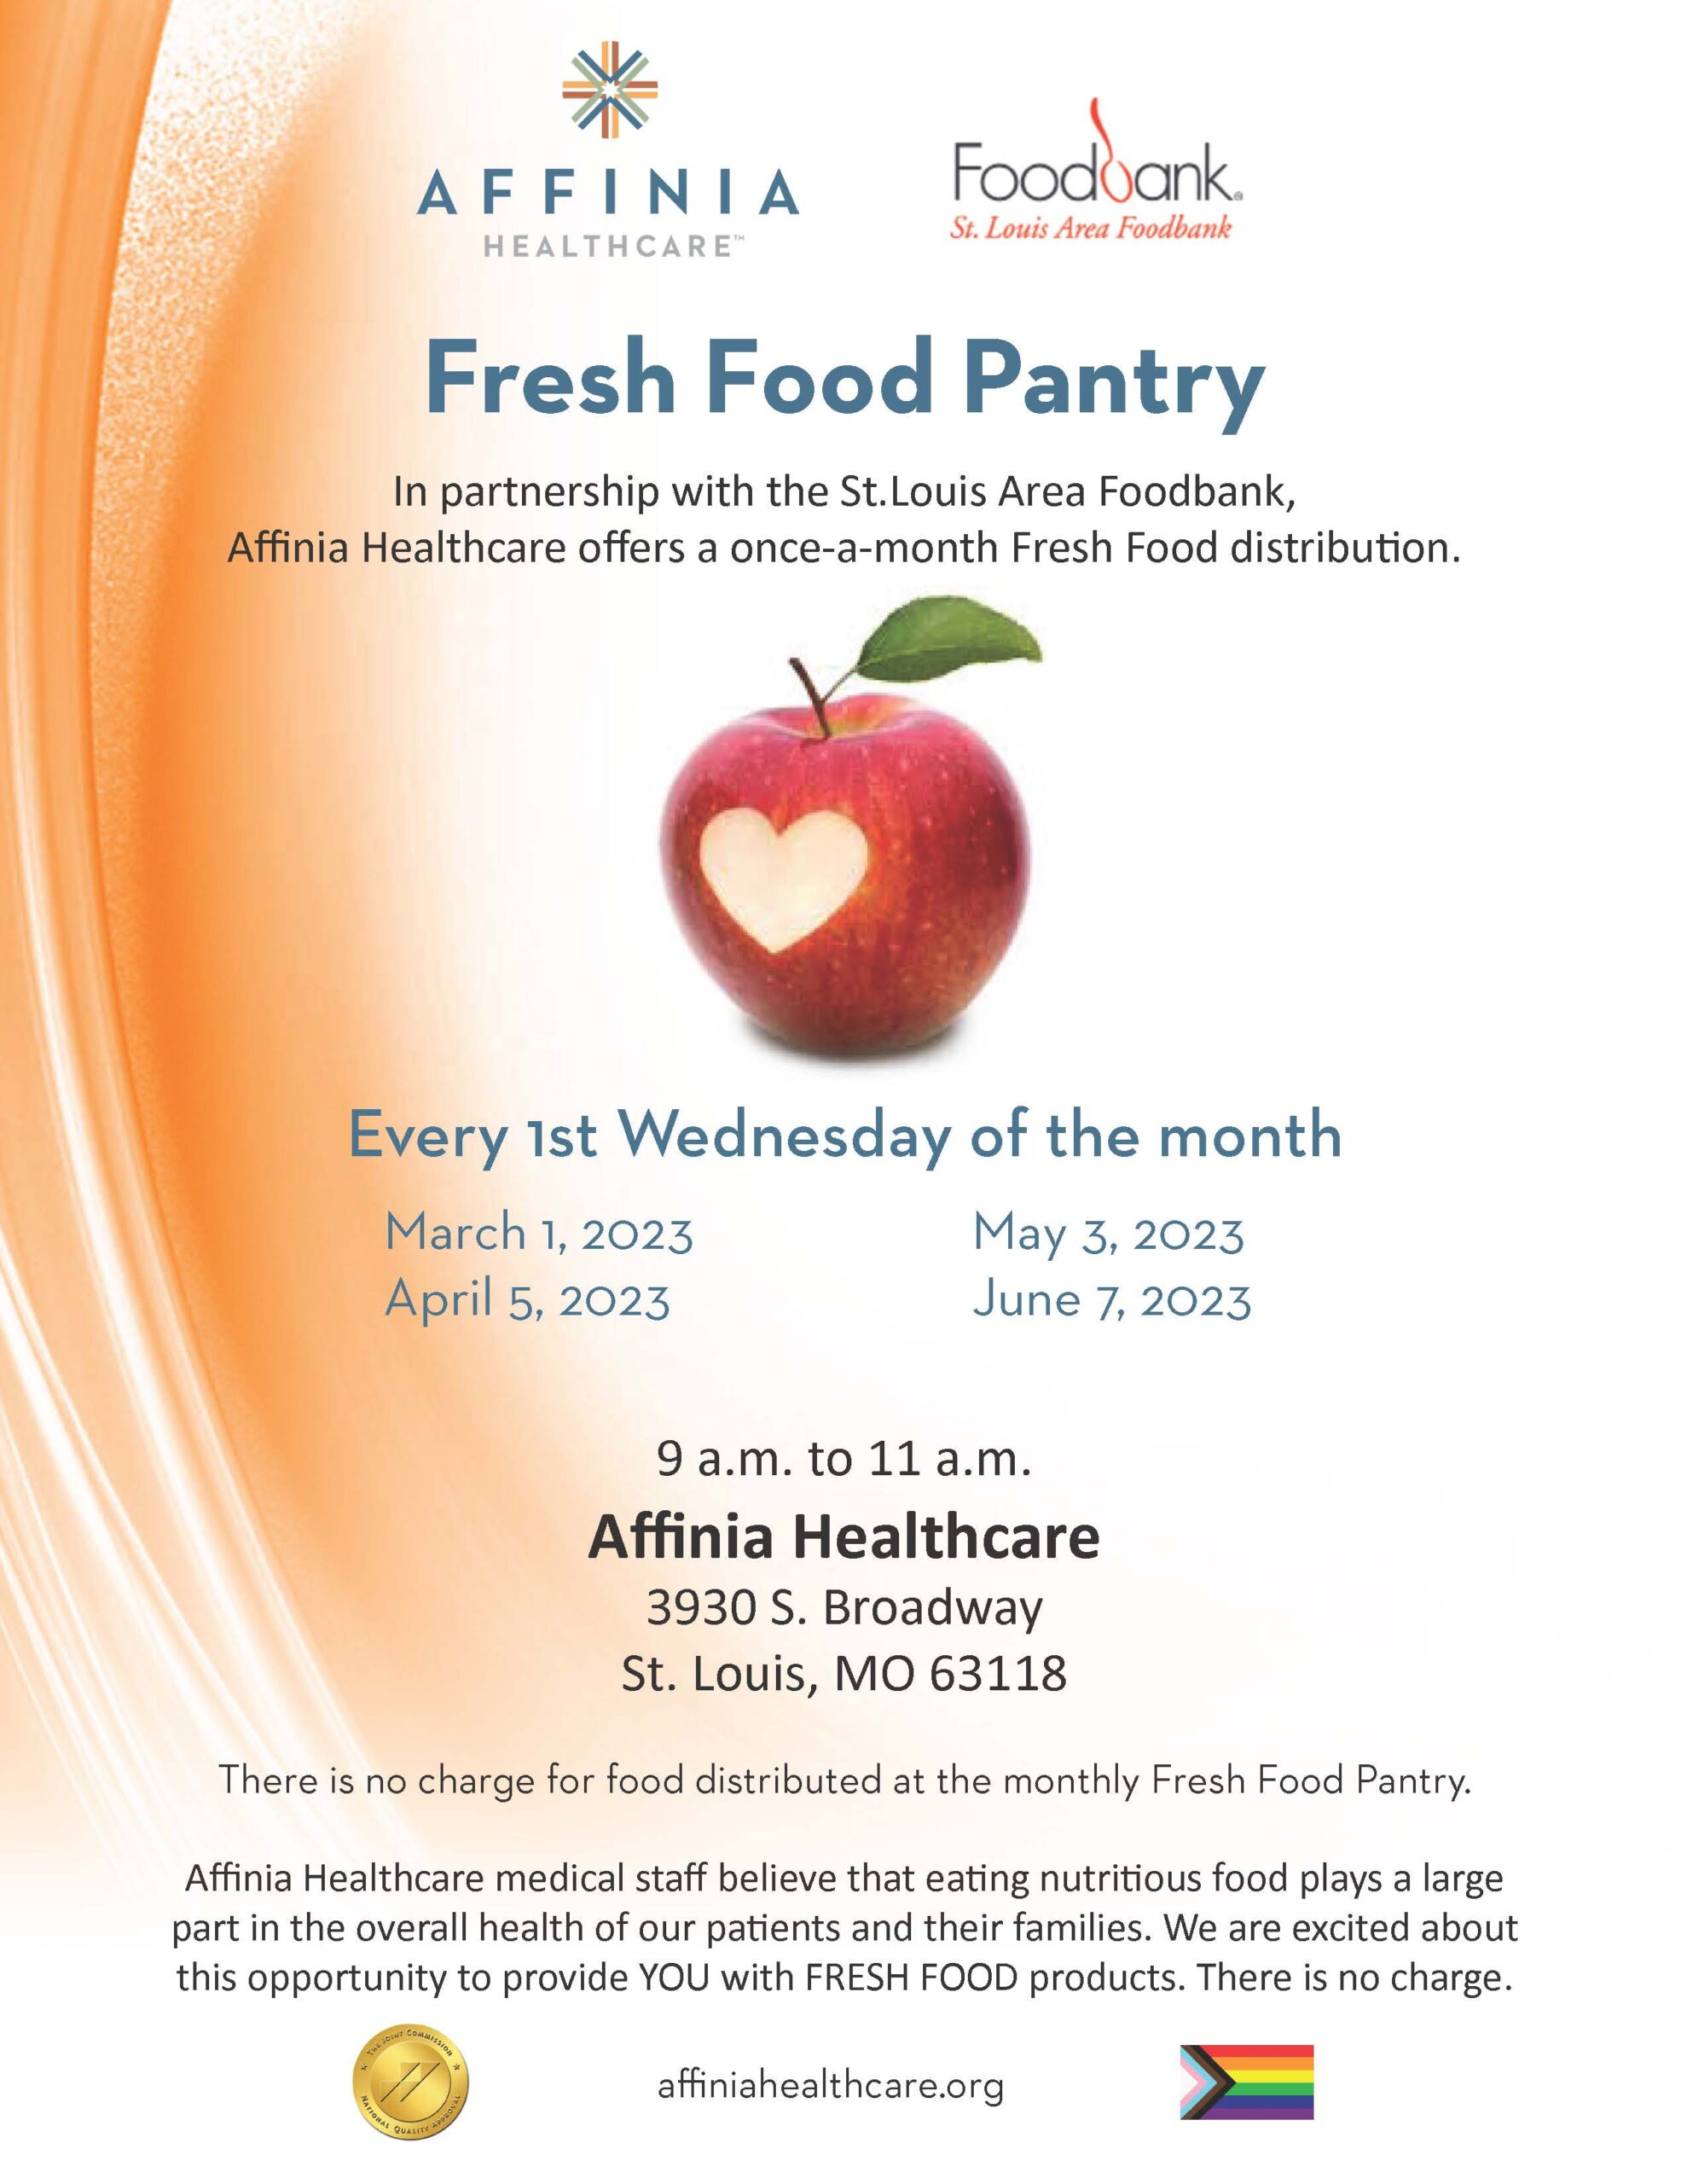 fresh food pantry at s. broadway first wed of month